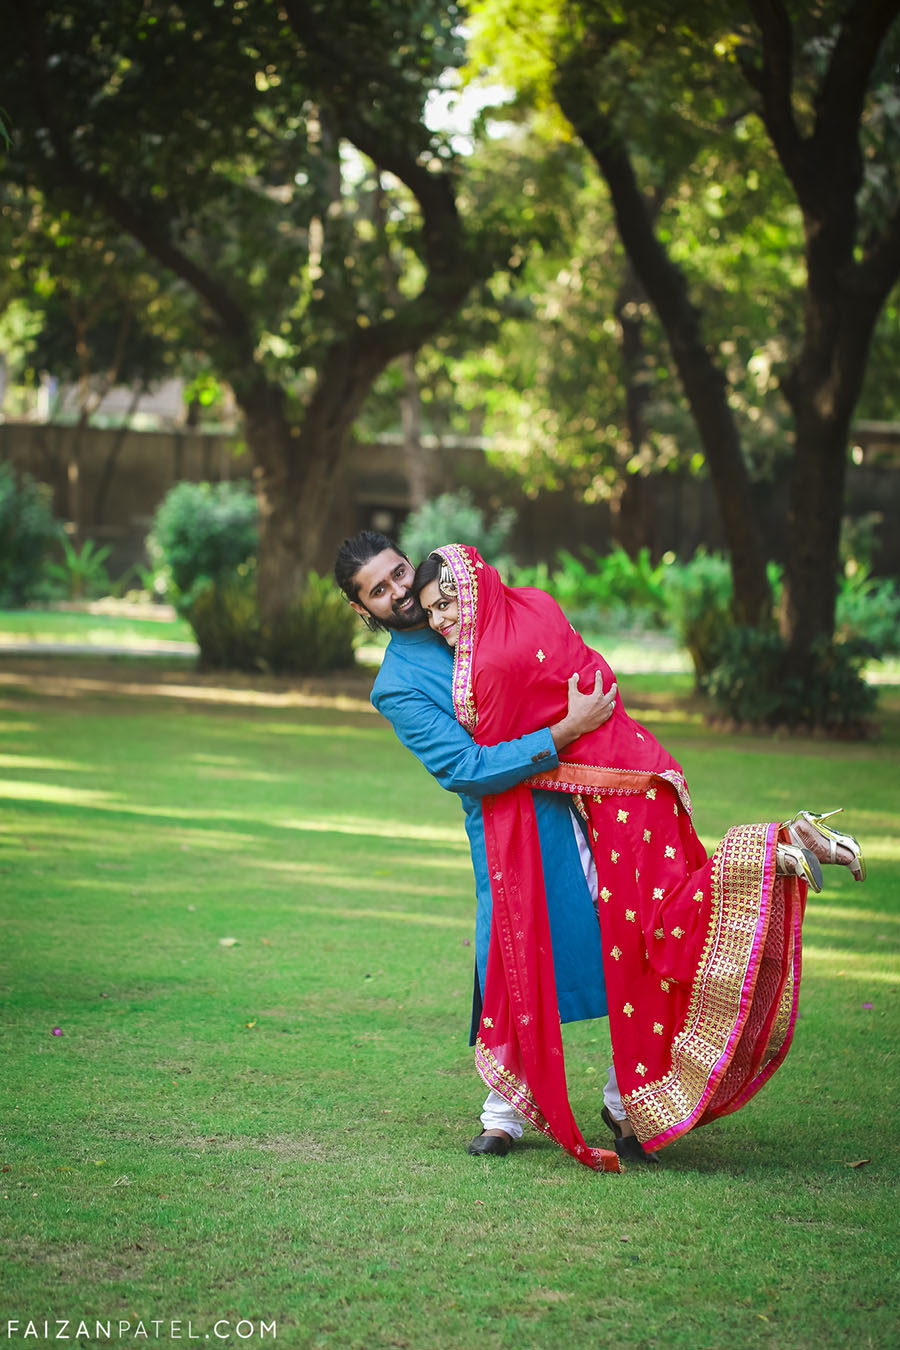 BEST CANDID WEDDING PHOTOGRAPHY IN COIMBATORE (28) - IRICH PHOTOGRAPHY